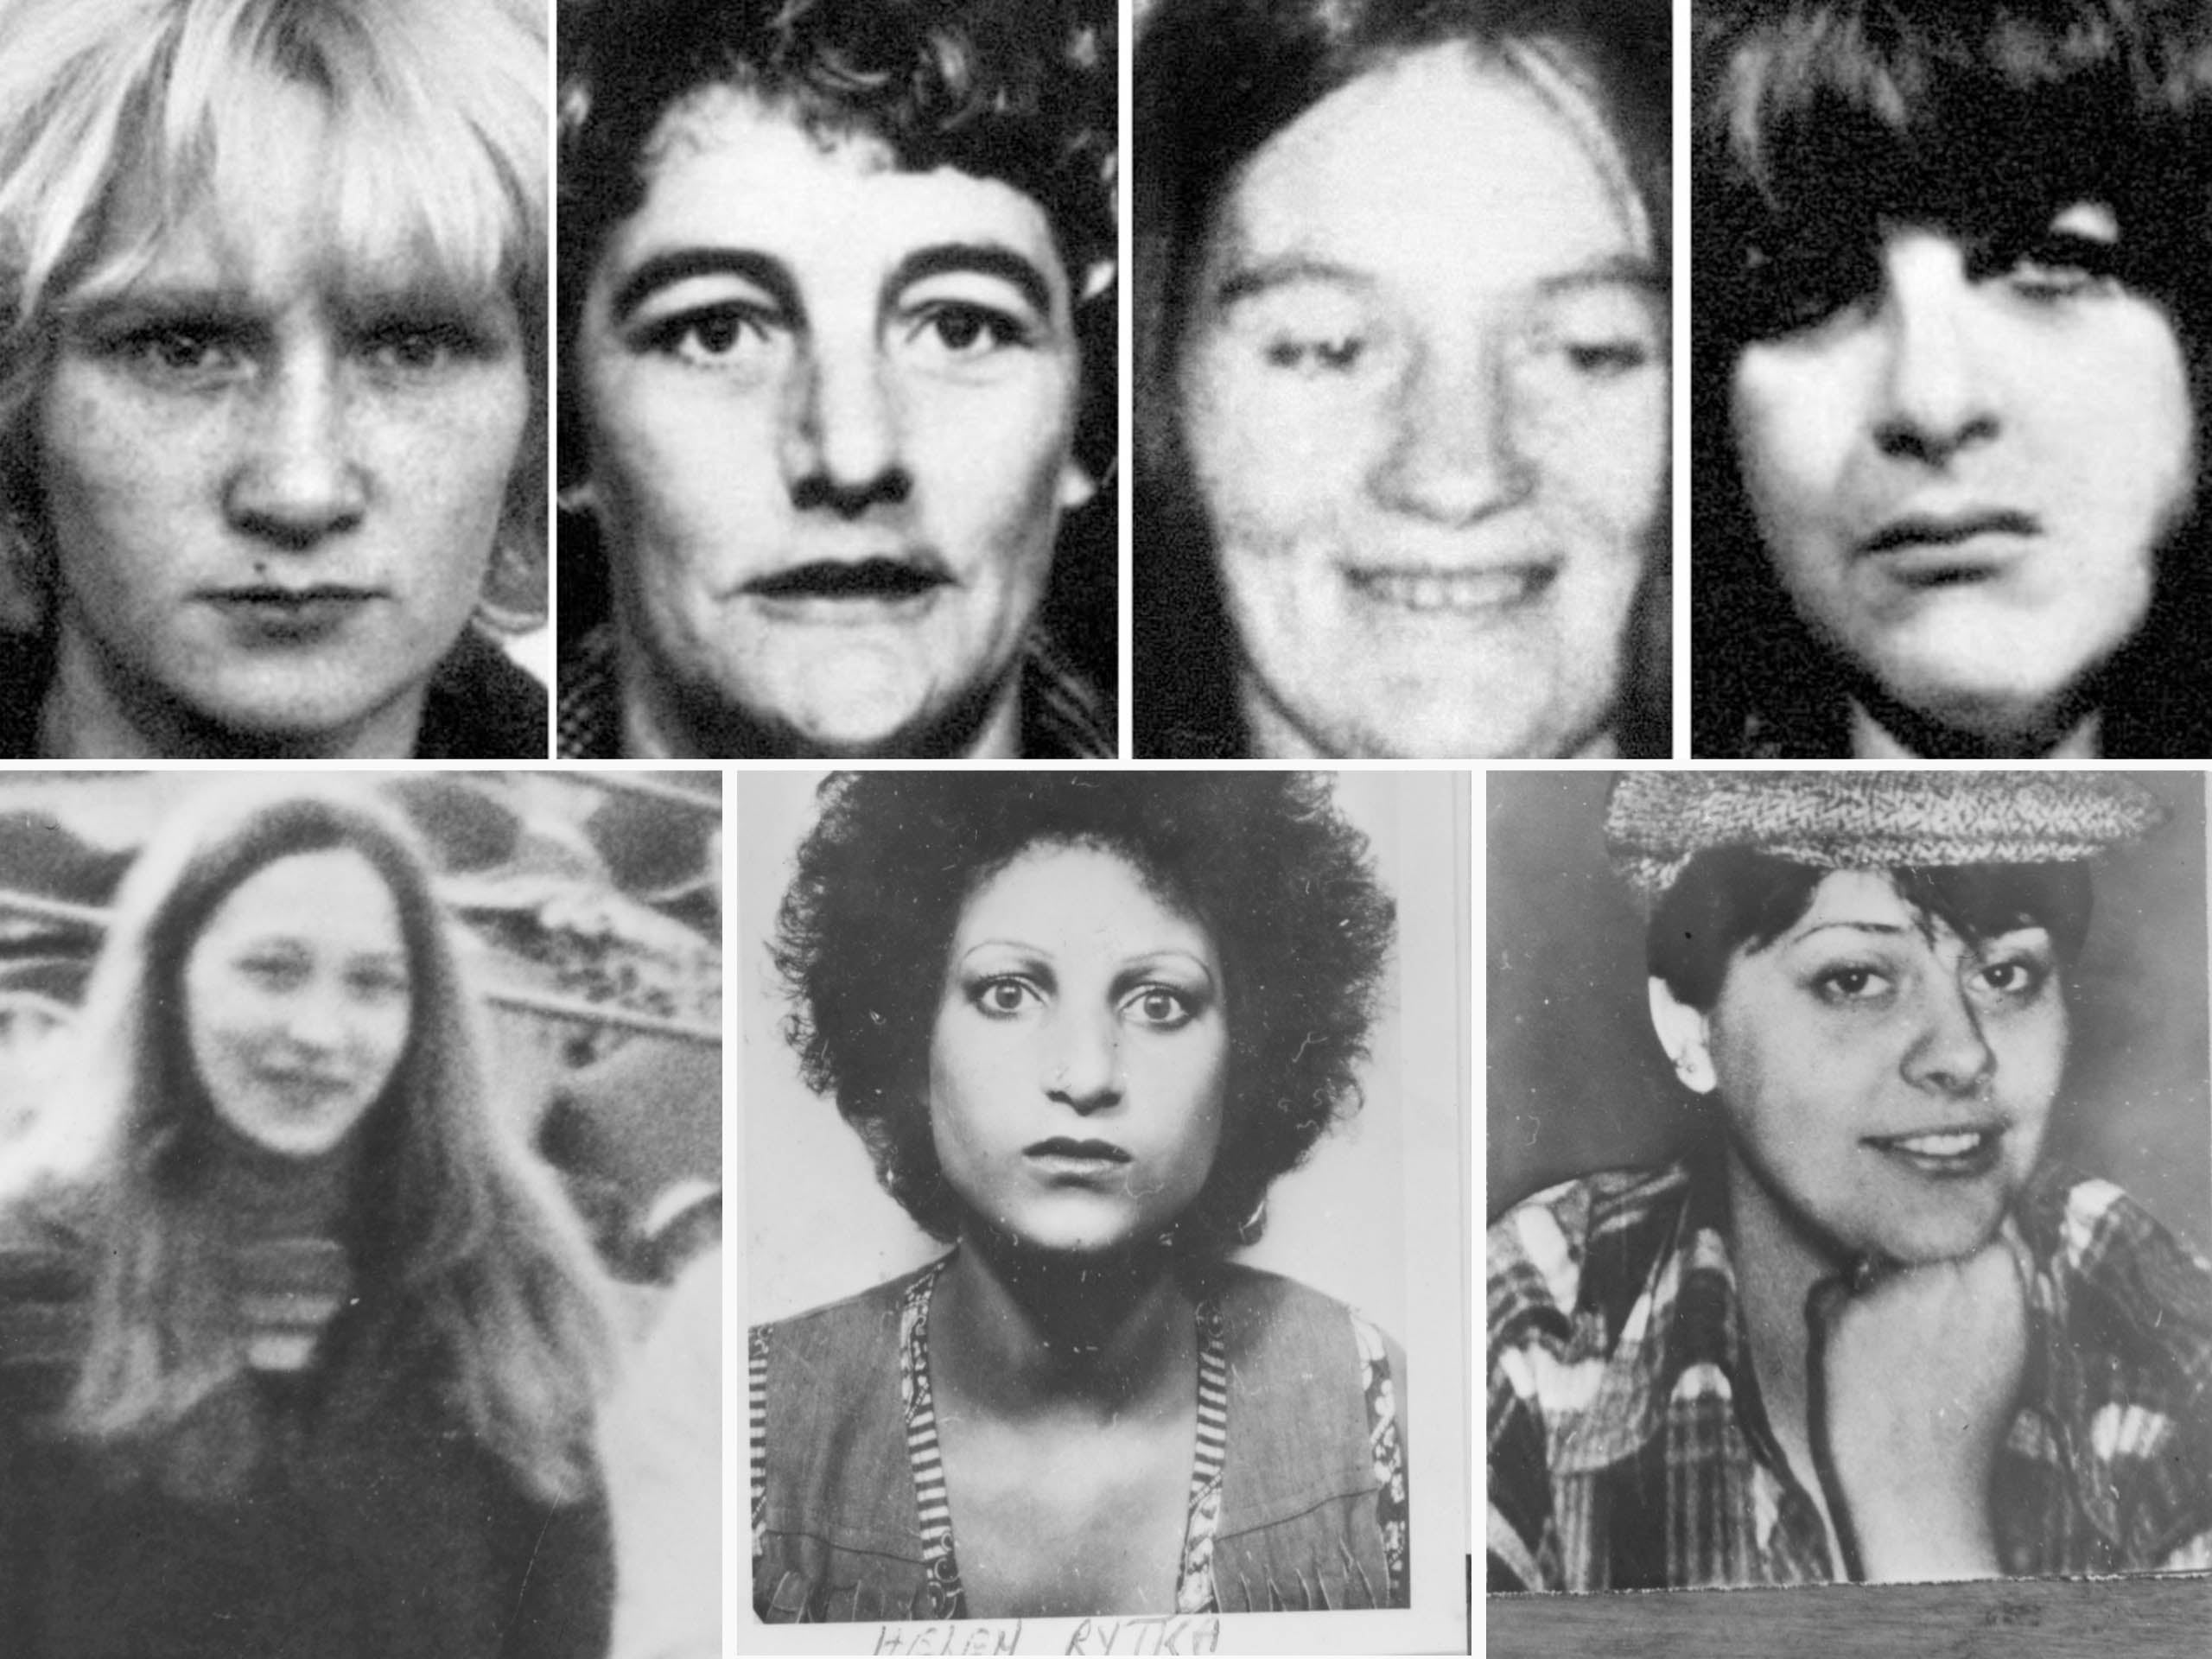 Wilma McCann, top left, pictured among some of the other victims of serial killer Peter Sutcliffe